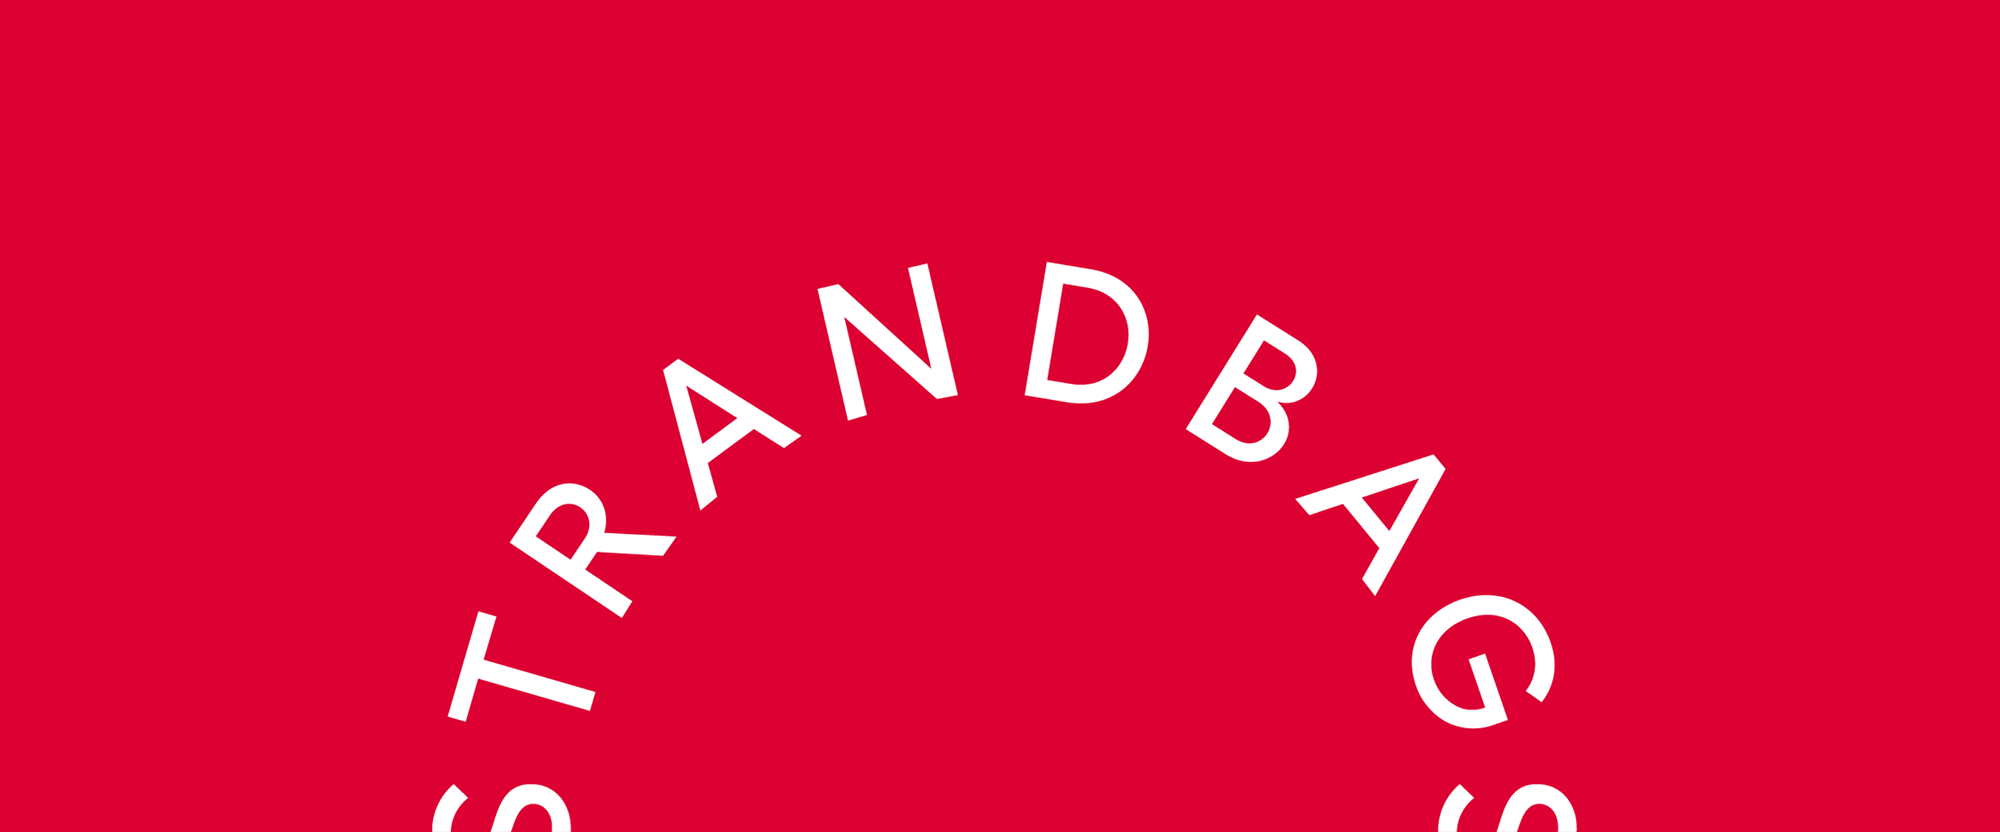 Follow-up: New Logo and Identity for Strandbags by Frost* Design